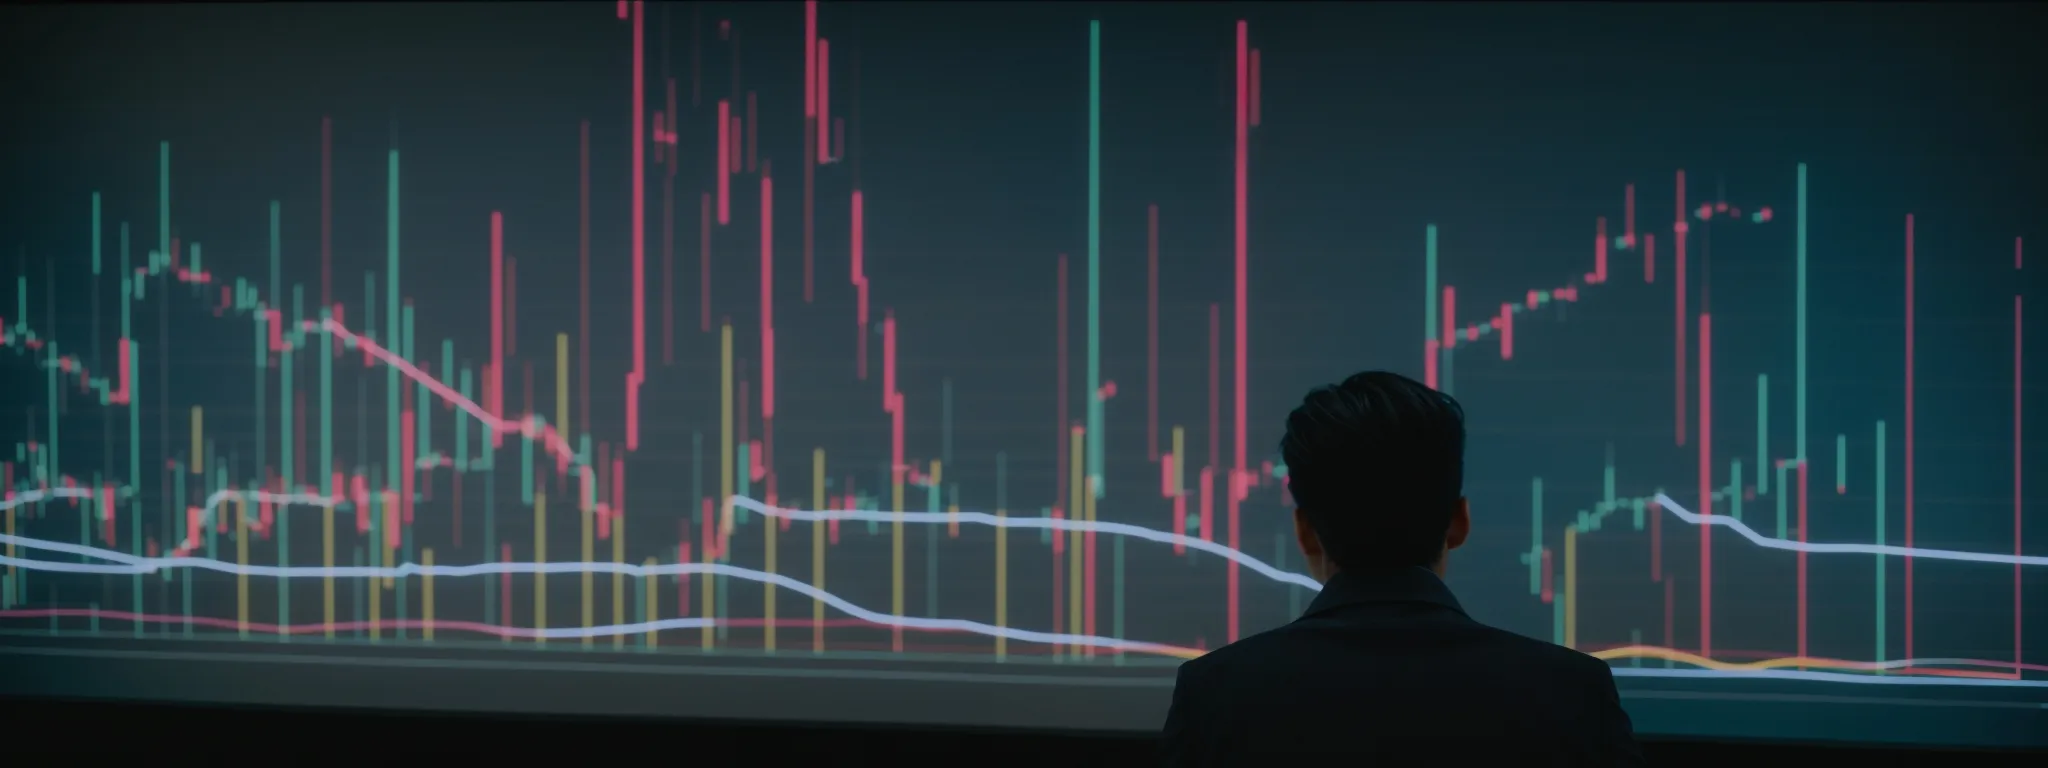 a person gazing intently at a computer screen that displays colorful line graphs and trend data.